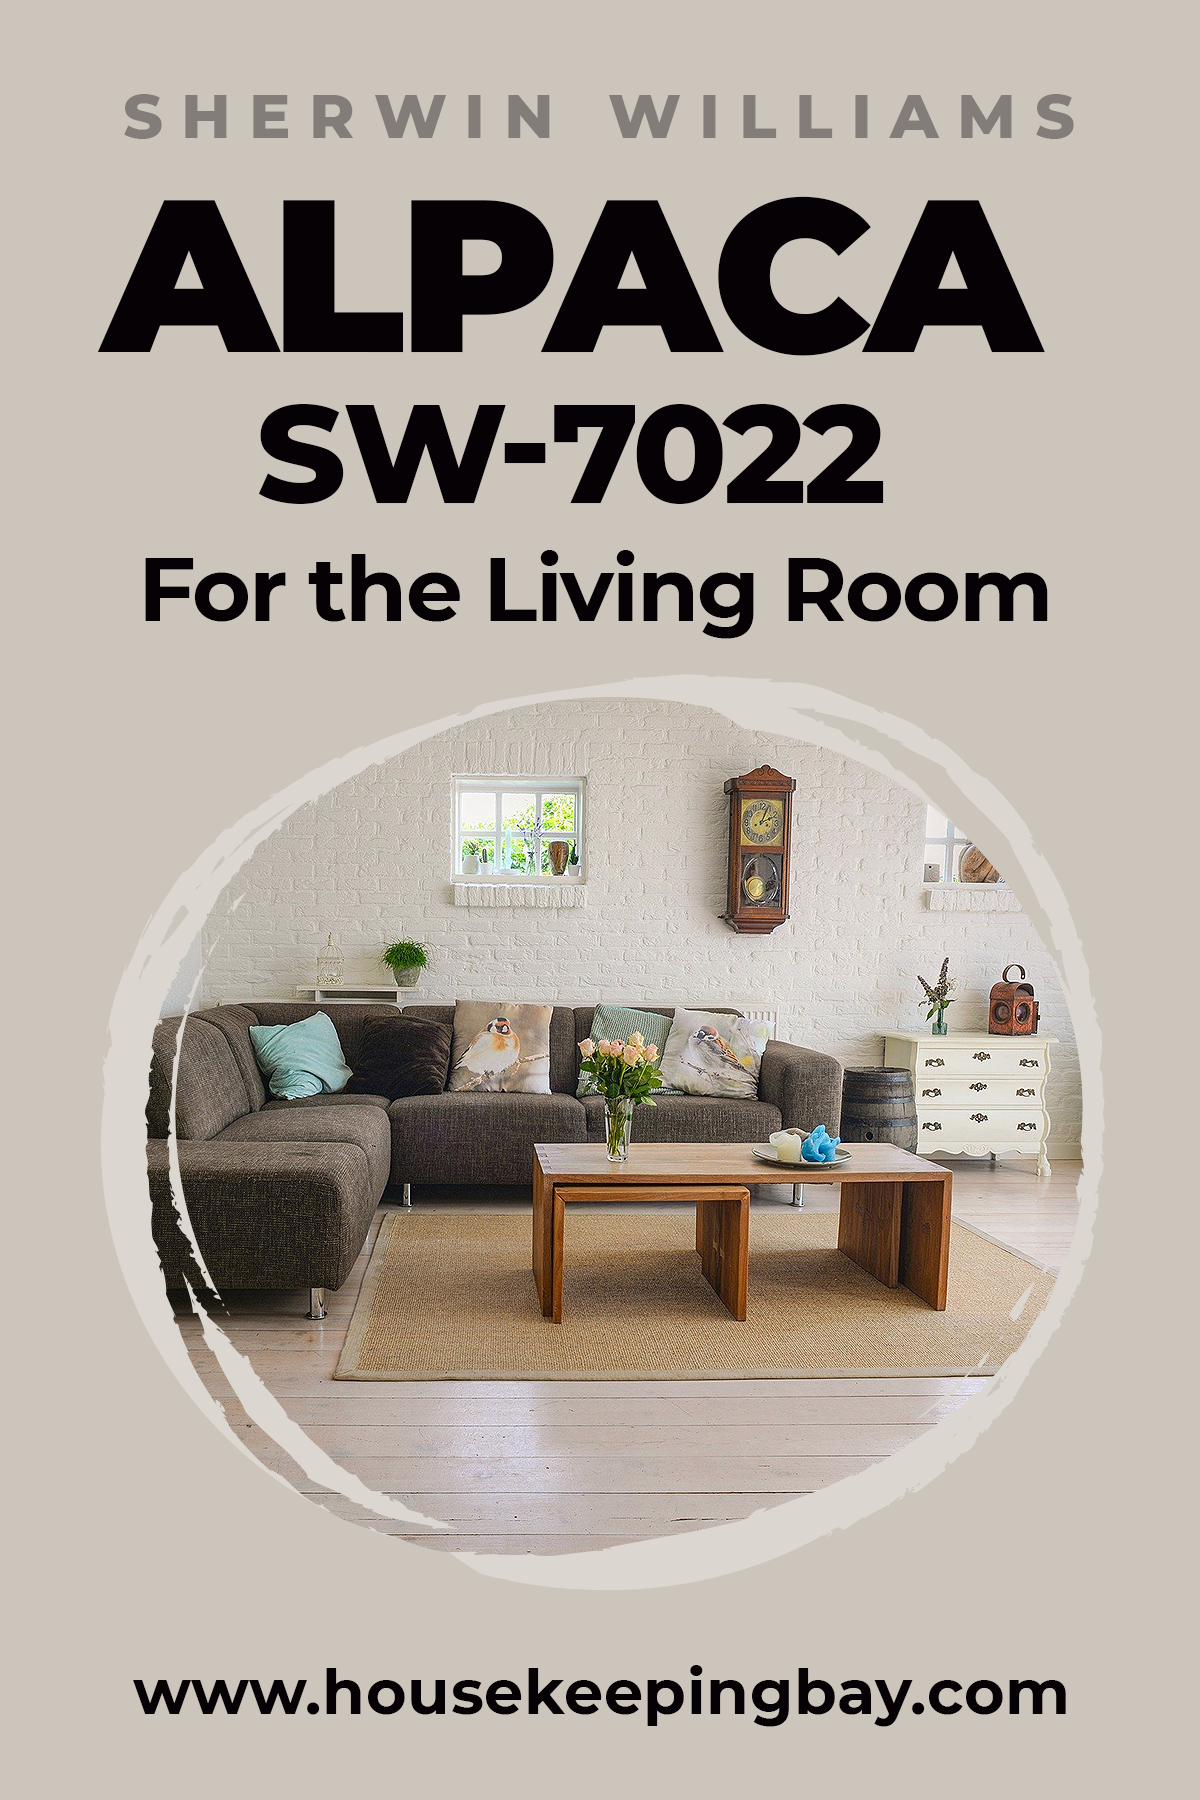 Alpaca SW 7022 By Sherwin Williams for the living room